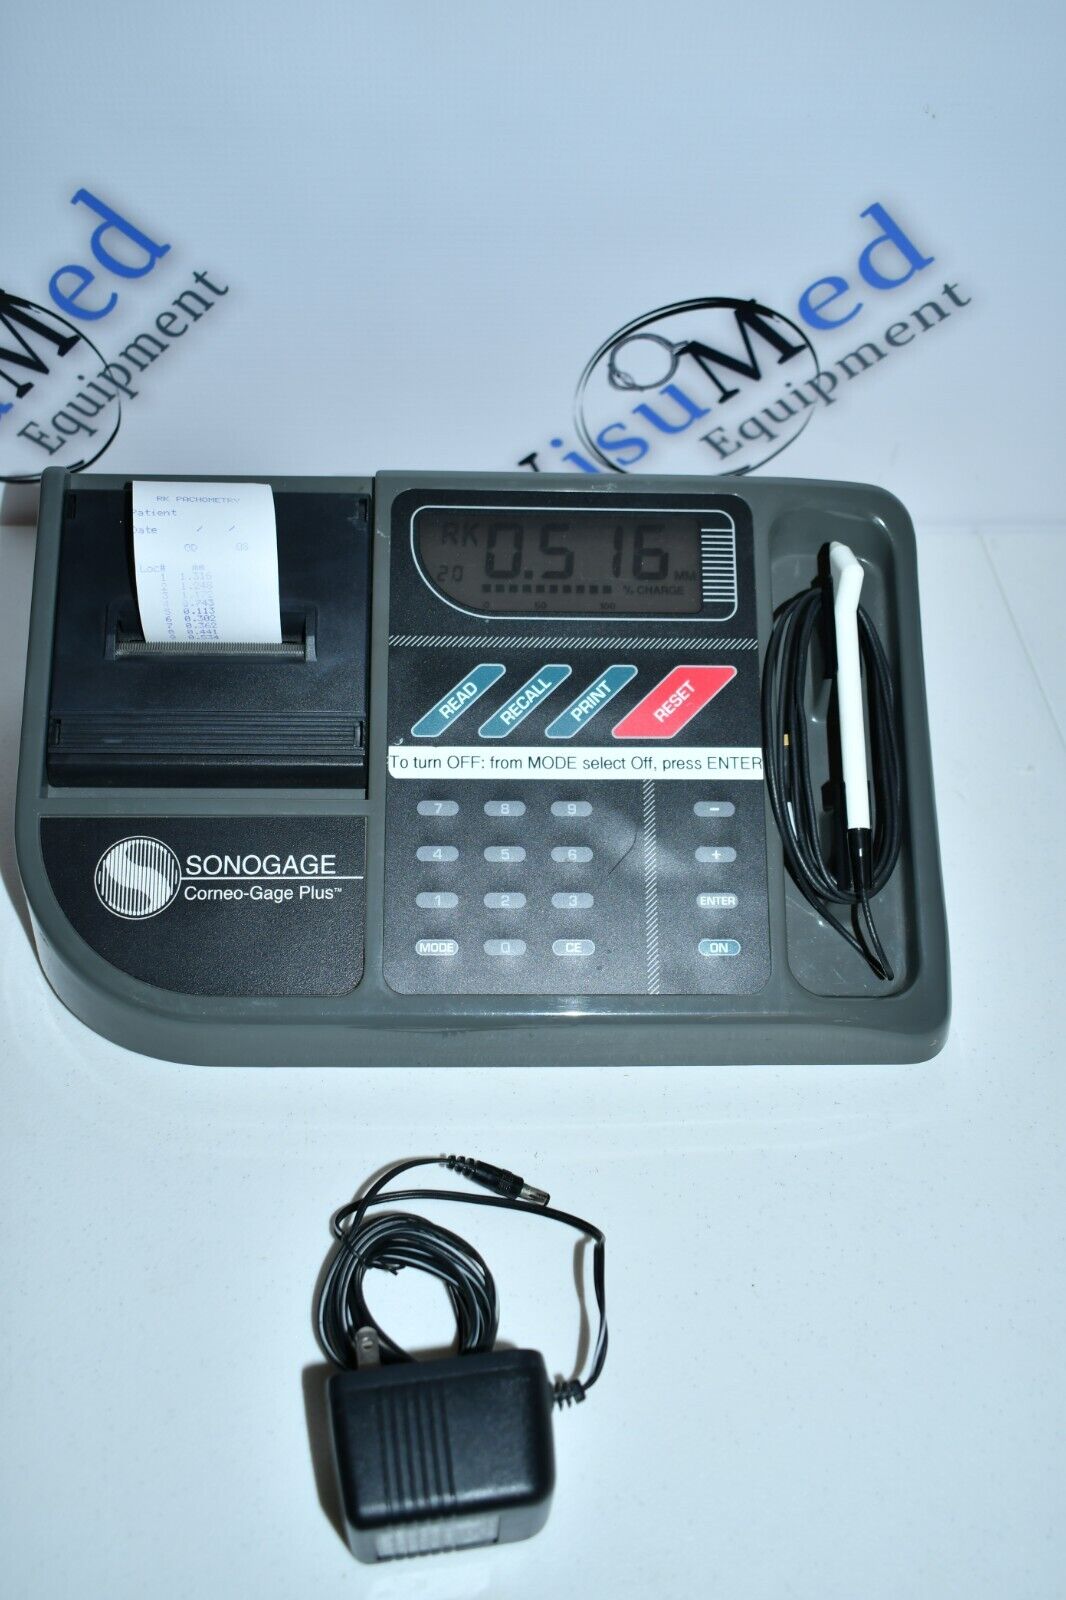 Sonogage Pachymeter pachometer with a built-in printer